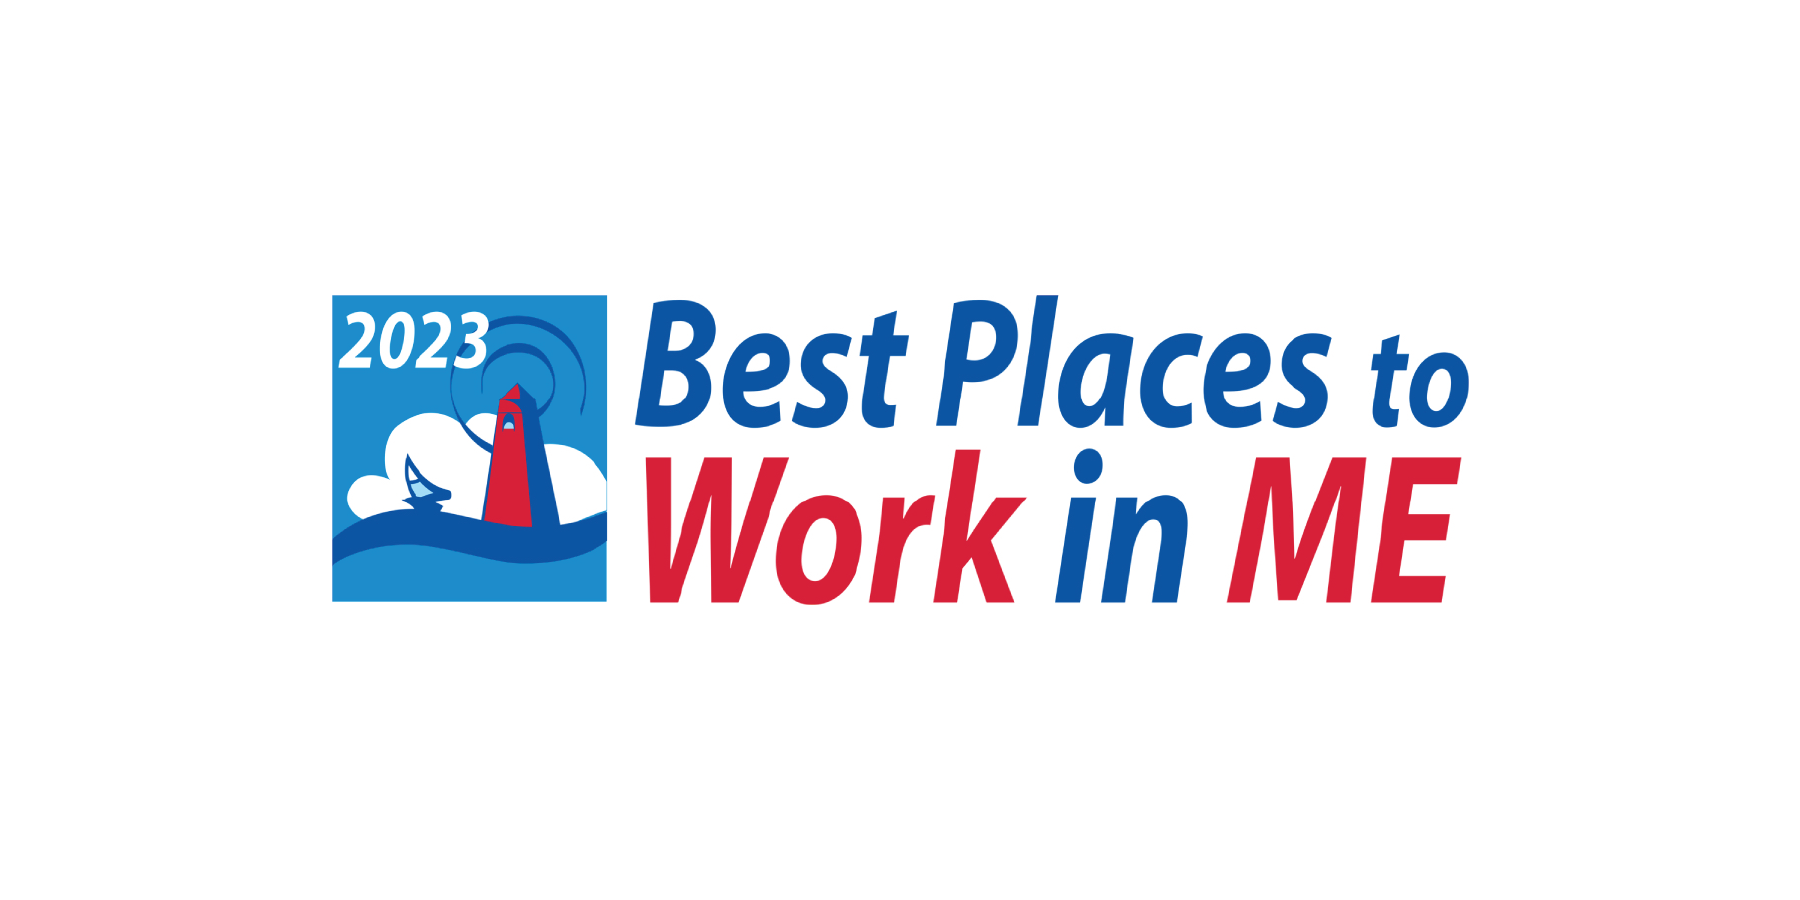 ATX Named Best Place to Work in Maine